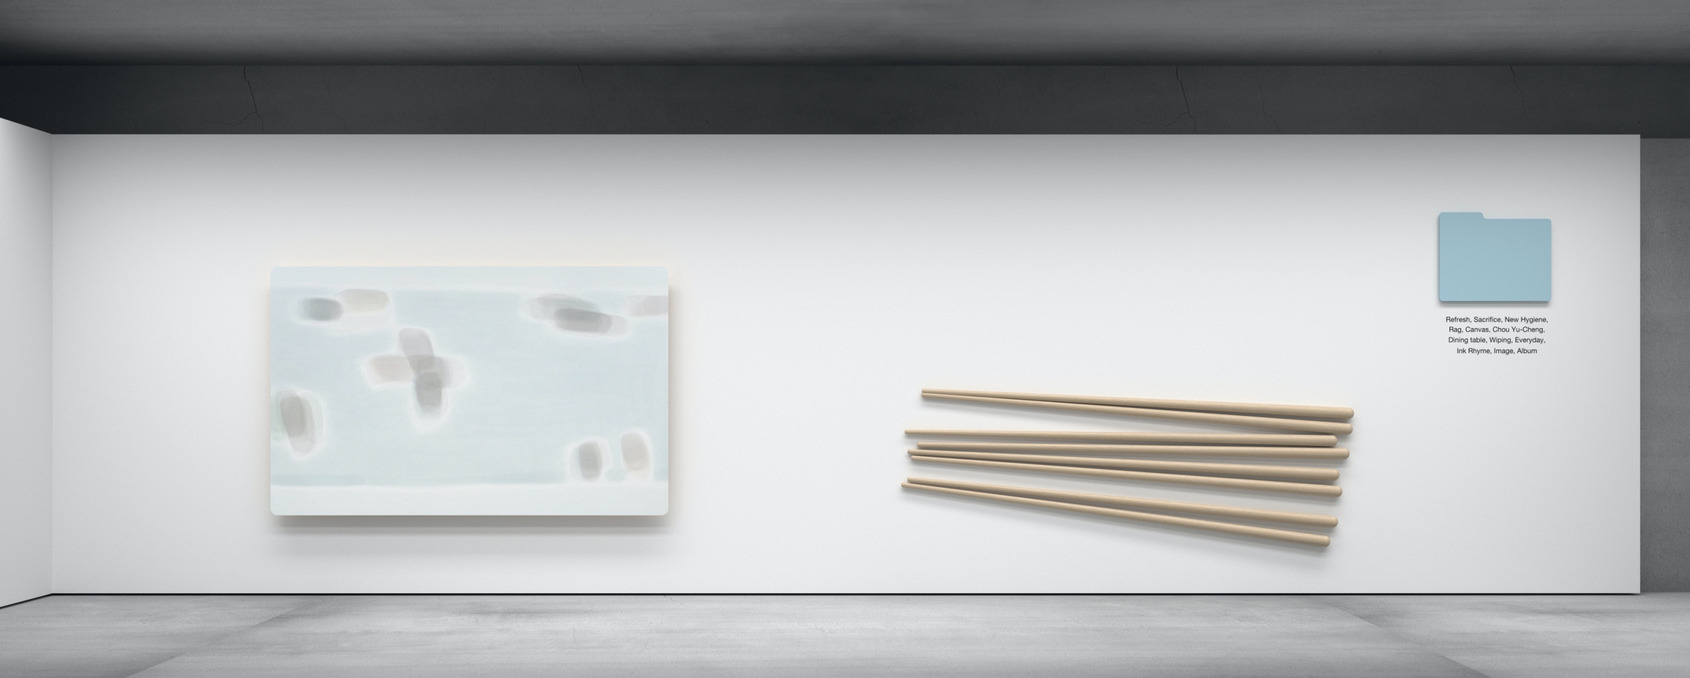 Chou Yu-Cheng, Refresh, Sacrifice, New Hygiene, Rag, Canvas, Chou Yu-Cheng, Dining table, Wiping, Everyday, Ink Rhyme, Image, Album, 2020, Painting, chopstick, file clip, 150×240×3 cm, 7×7×260 cm ×8 pcs, 68×54×2 cm Courtesy the Artist and Edouard Malingue Gallery